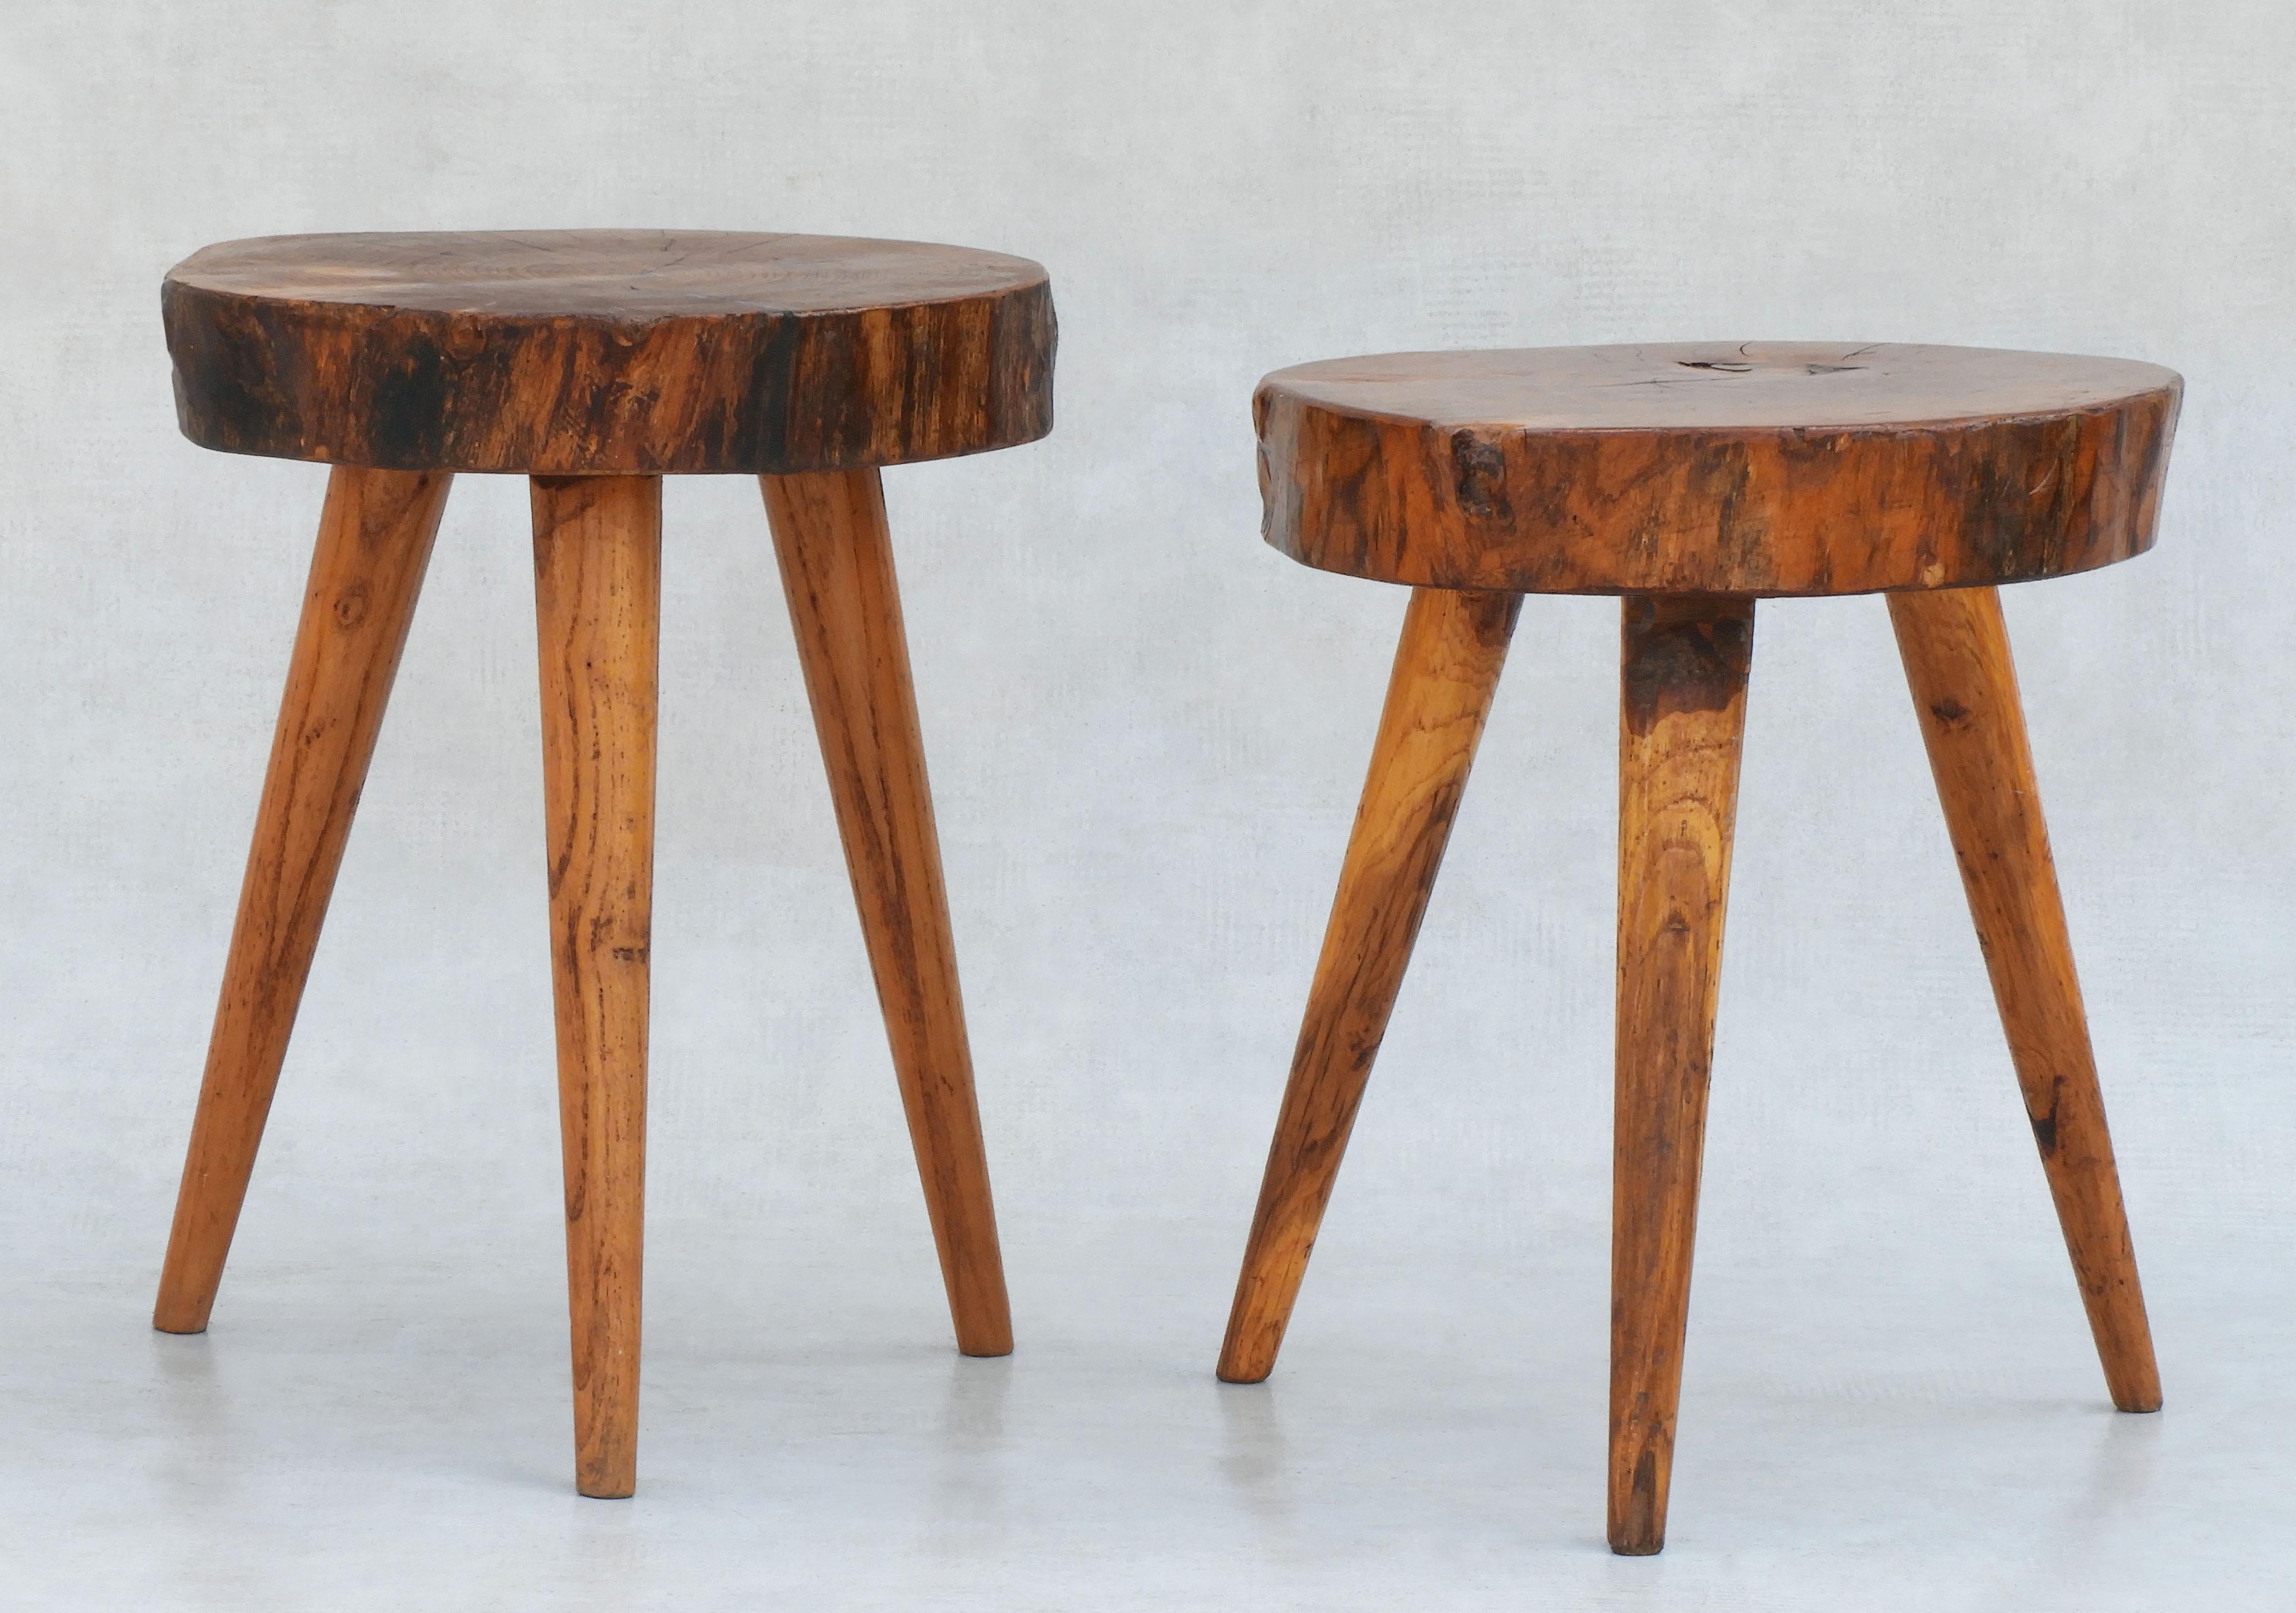 A fabulous pair of wooden three-legged tabouret stools handcrafted in France C1950. Well made, solid and sound with no hardware. Live edge, good grain, great patina. A really nice example of mid-century handmade French Arte Populaire in great